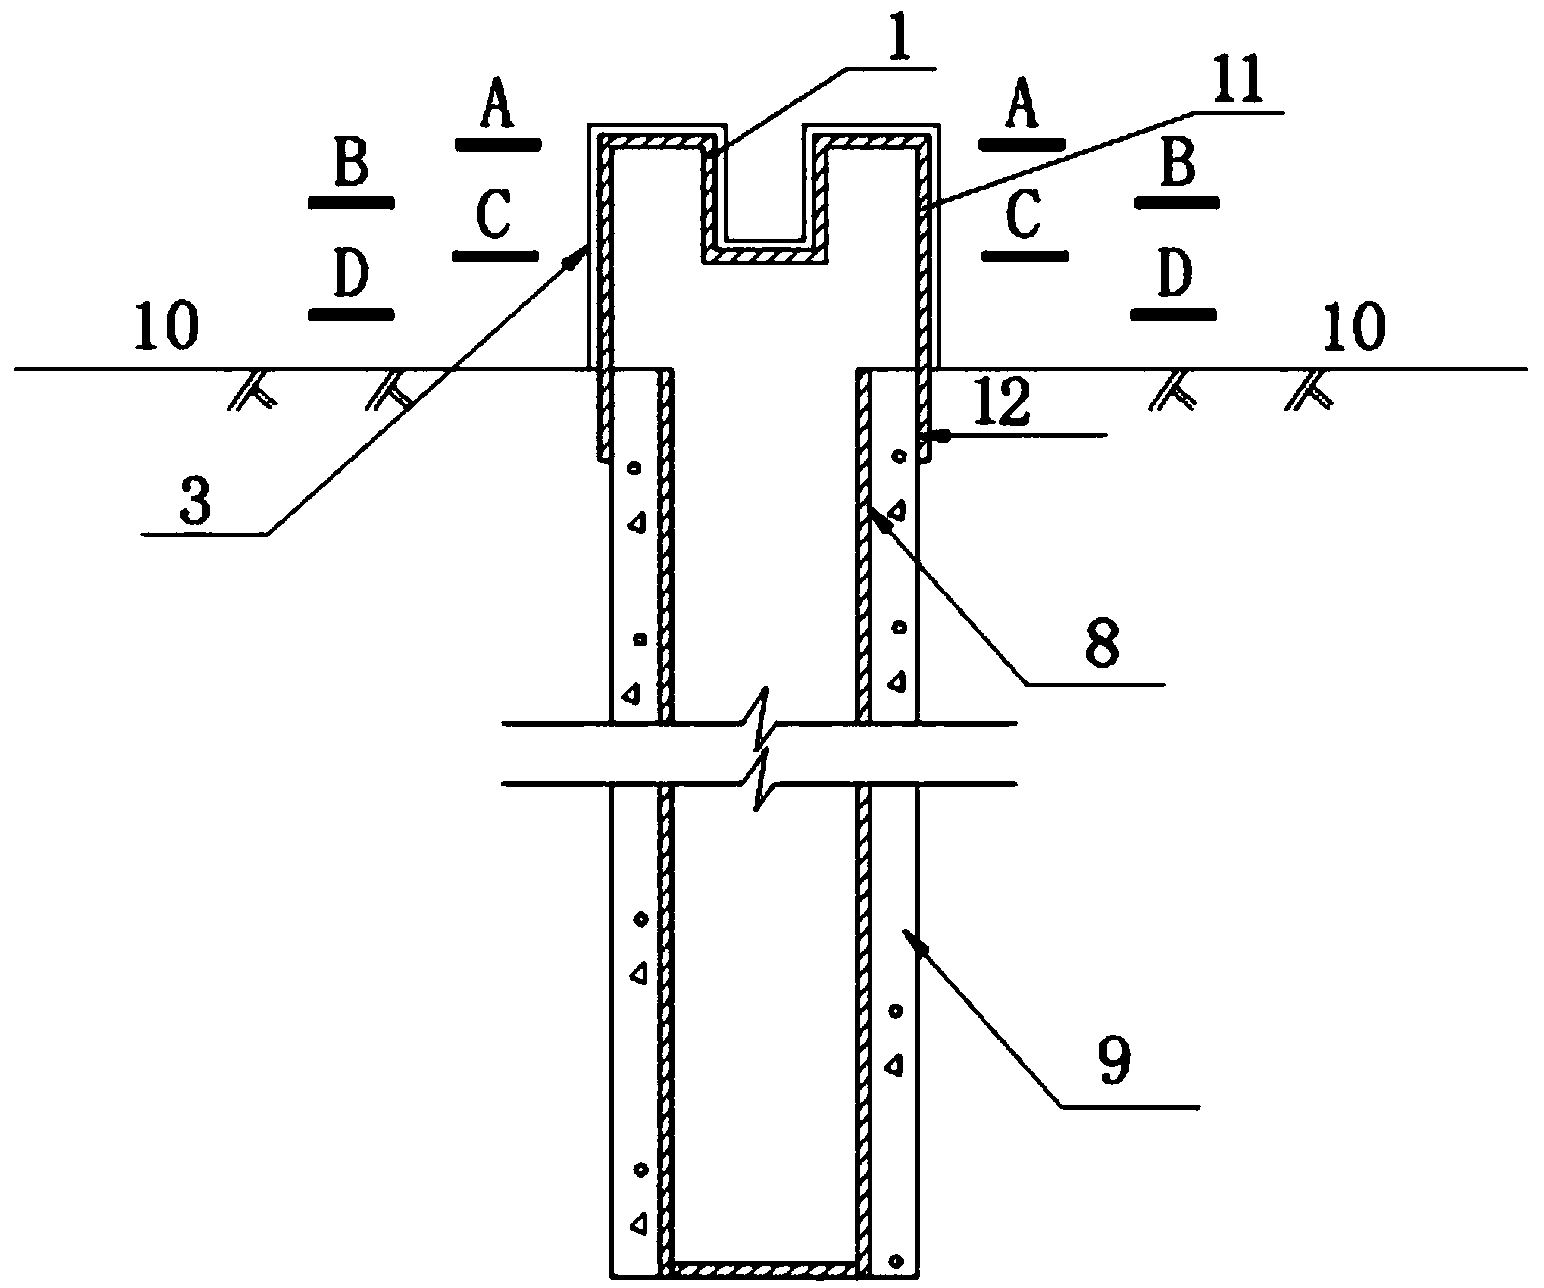 Internal-and-external-inflow well head device of self-infiltration filtration recharge well